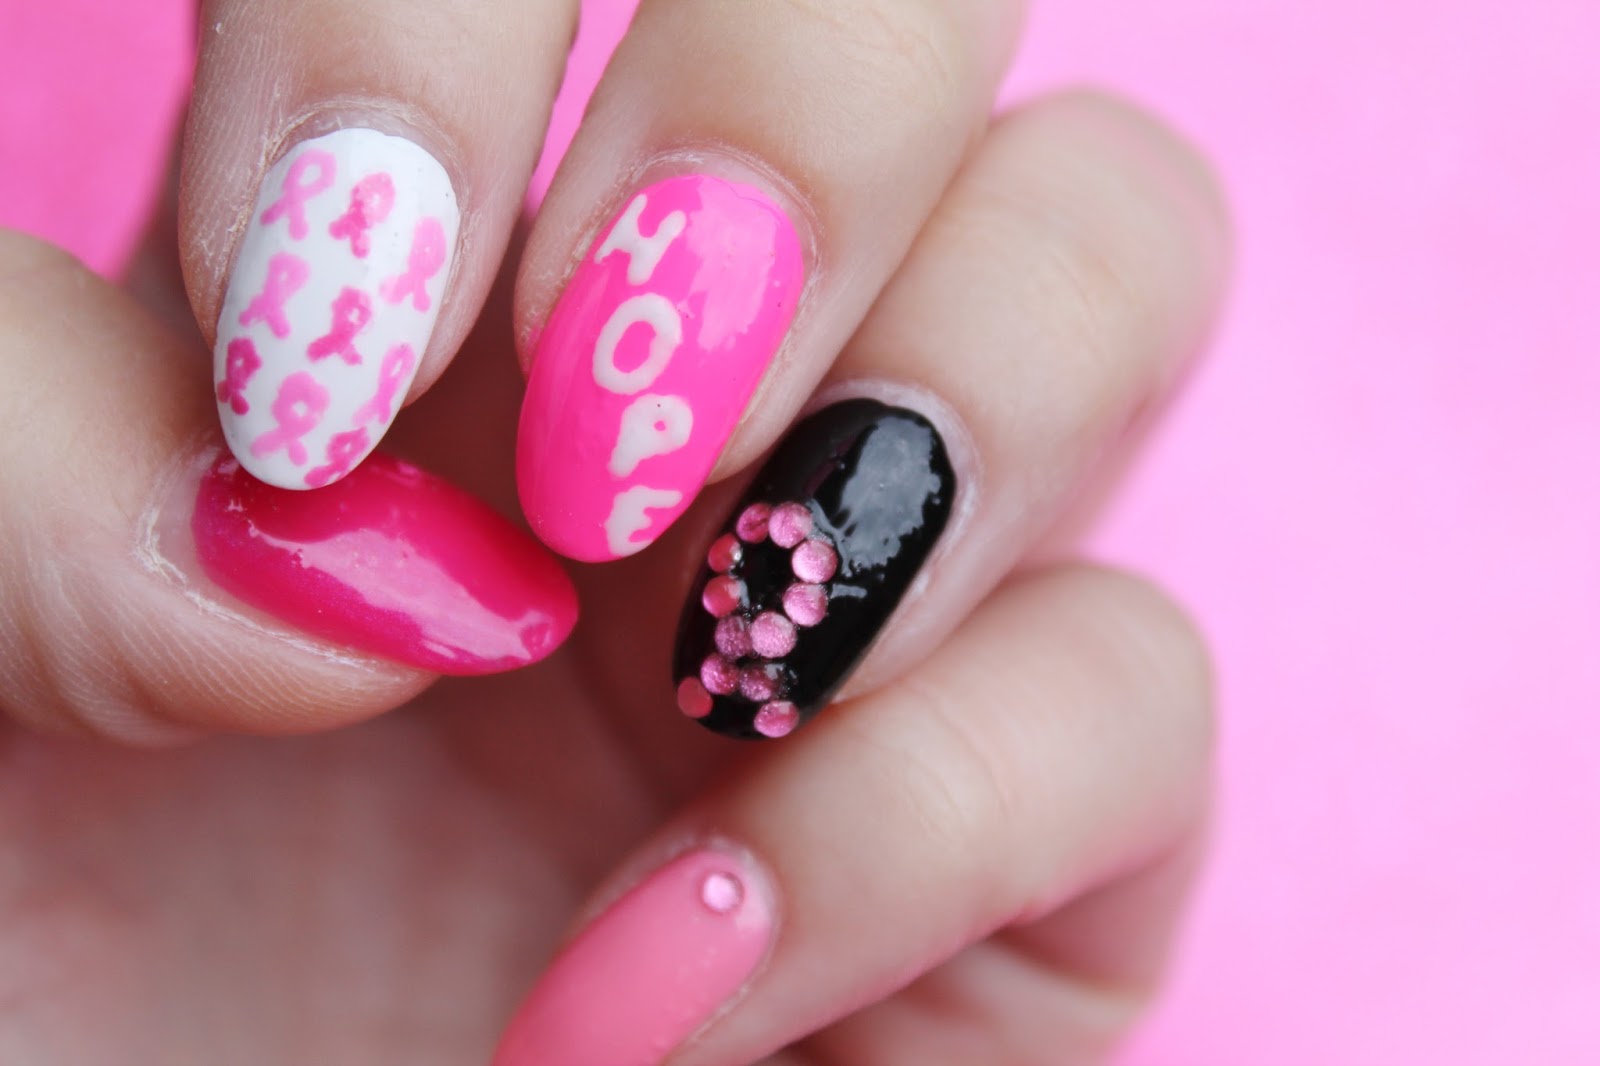 4. Pink and Black Floral Nail Art - wide 4